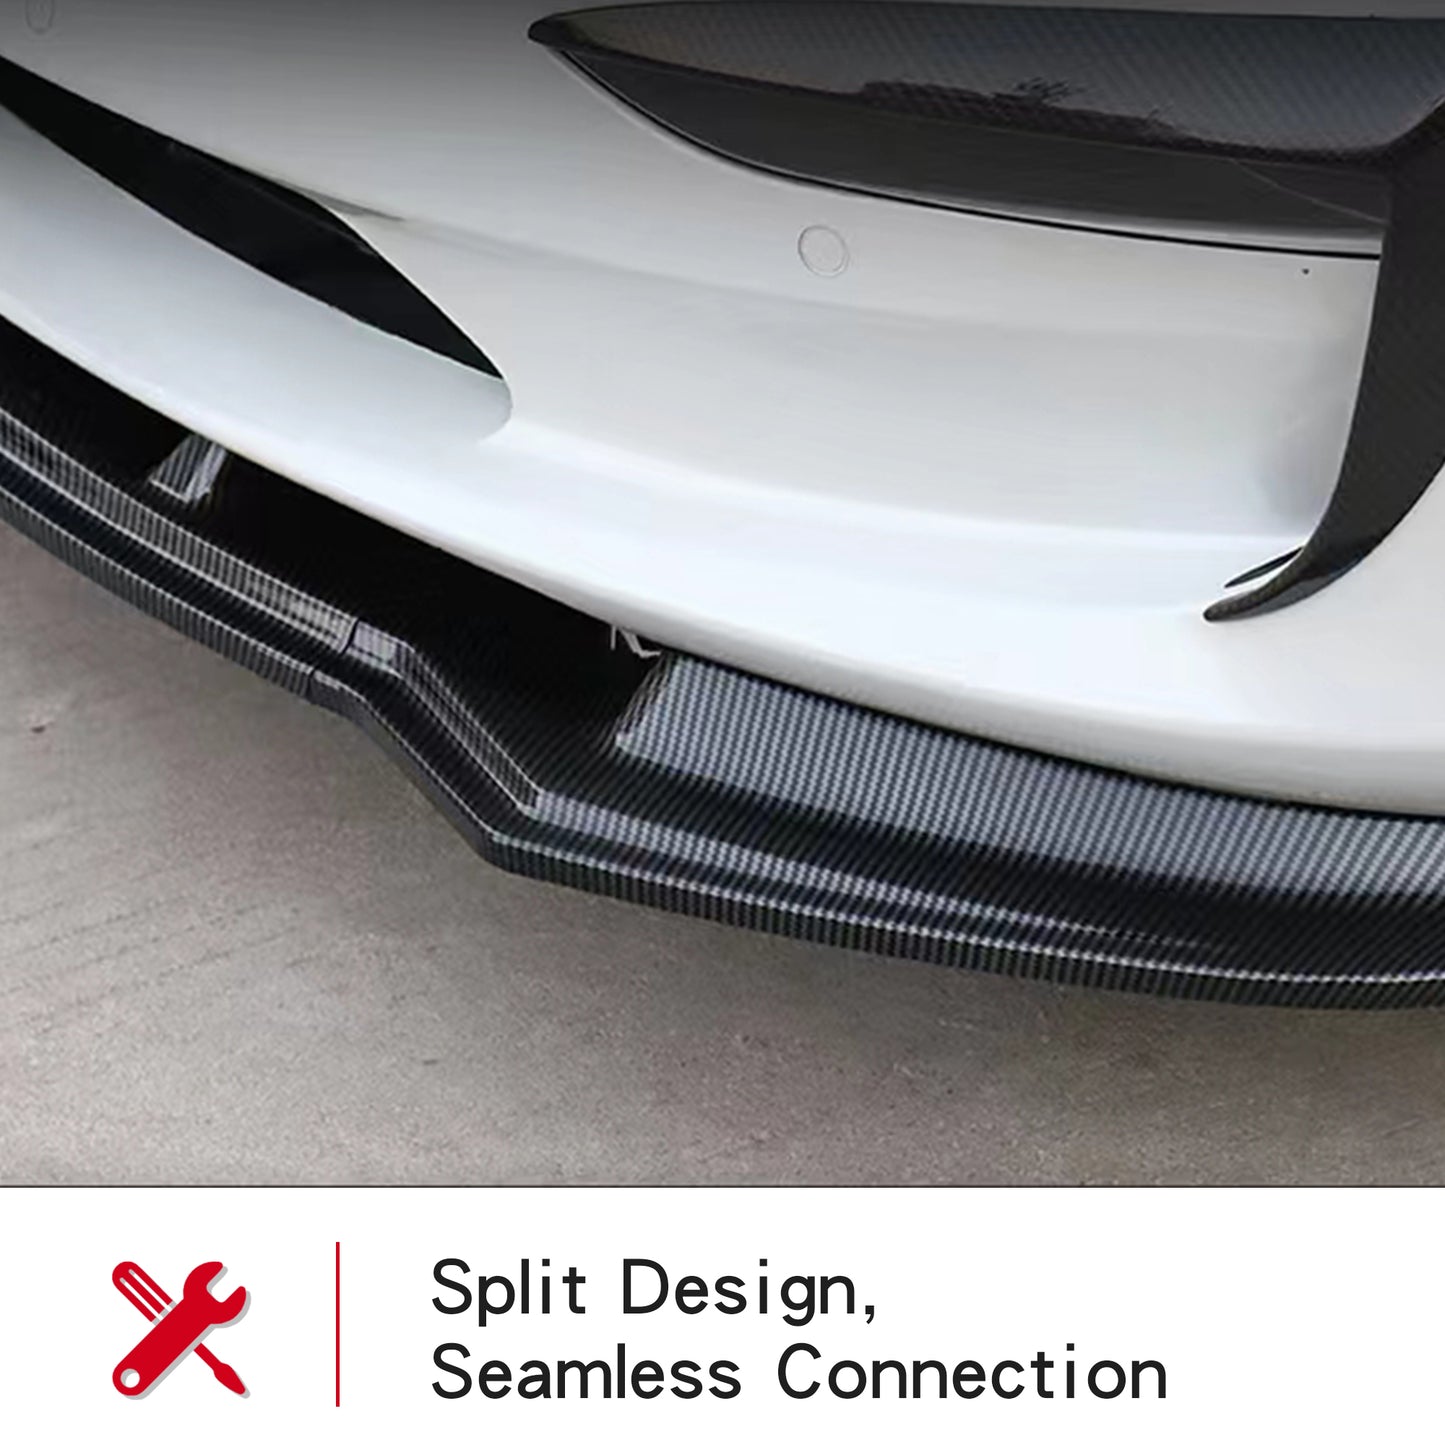 tesla model 3 front bumper lip spoiler splitter install car 2022 2023 2021 2020 2019 2018 s3xy arcoche accessories accessory aftermarket price Vehicles standard long range performance sr+ electric car rwd ev interior exterior diy decoration price elon musk must have black white red blue 5 7 seats seat